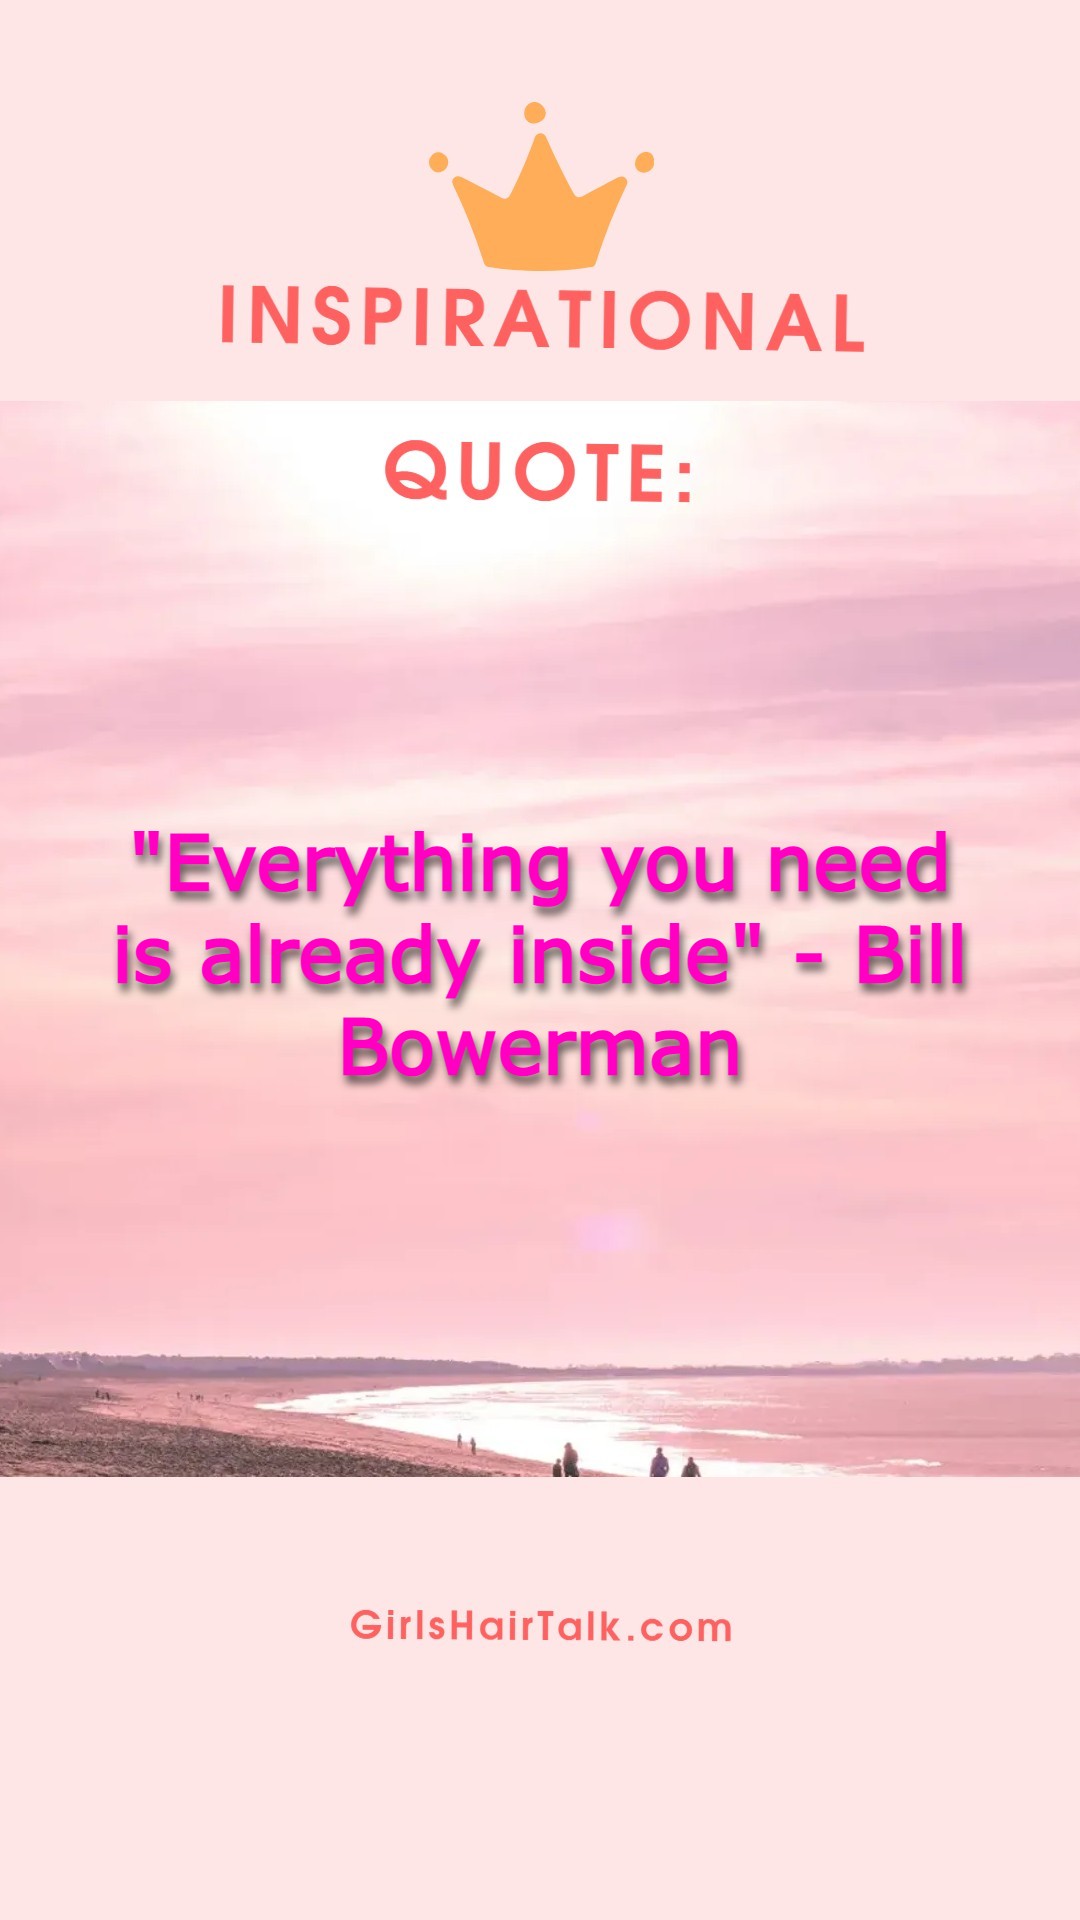 Bill Bowerman cancer quote